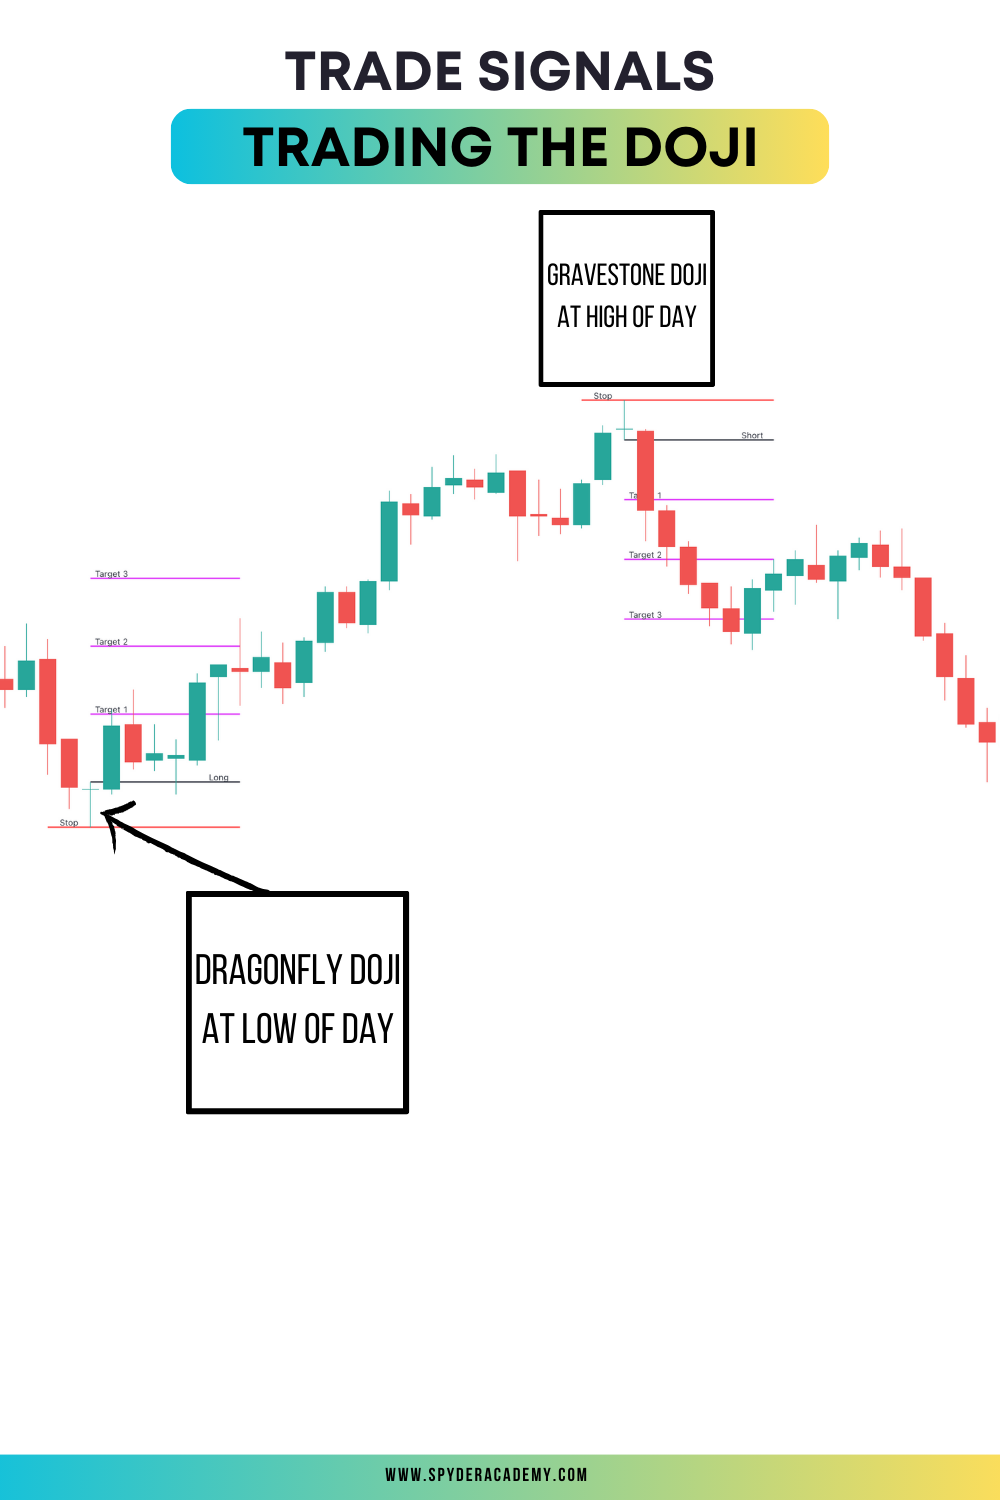 Explore the world of Doji candles and master the art of using Gravestones and Dragonflies for reversal signals. Learn how volume and key levels play a crucial role in your trading decisions.